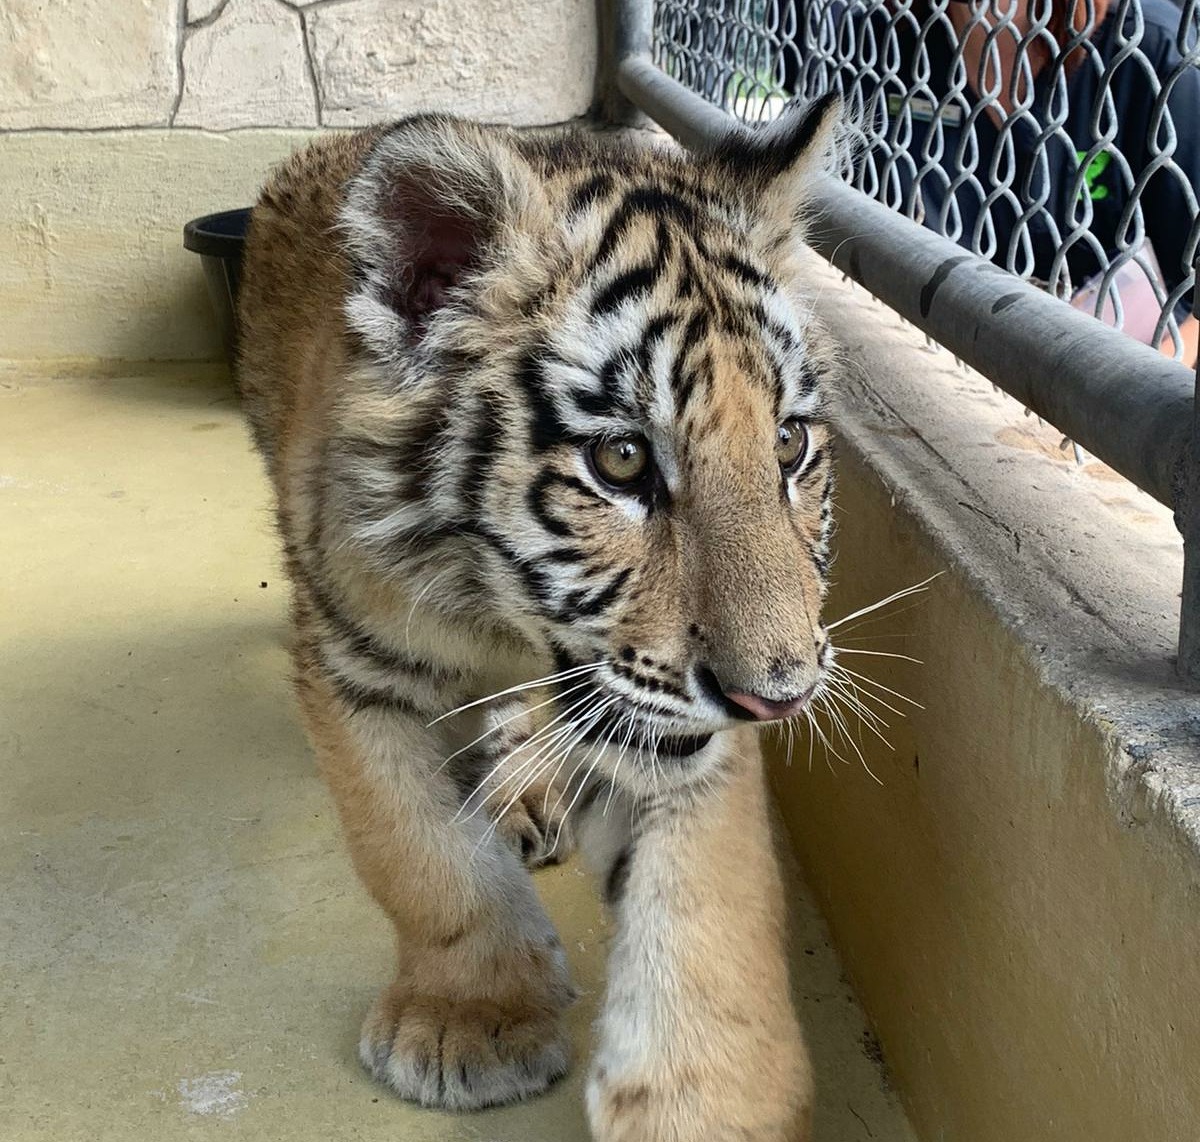 The San Antonio Zoo shared images of the tiger and bobcat rescued earlier.